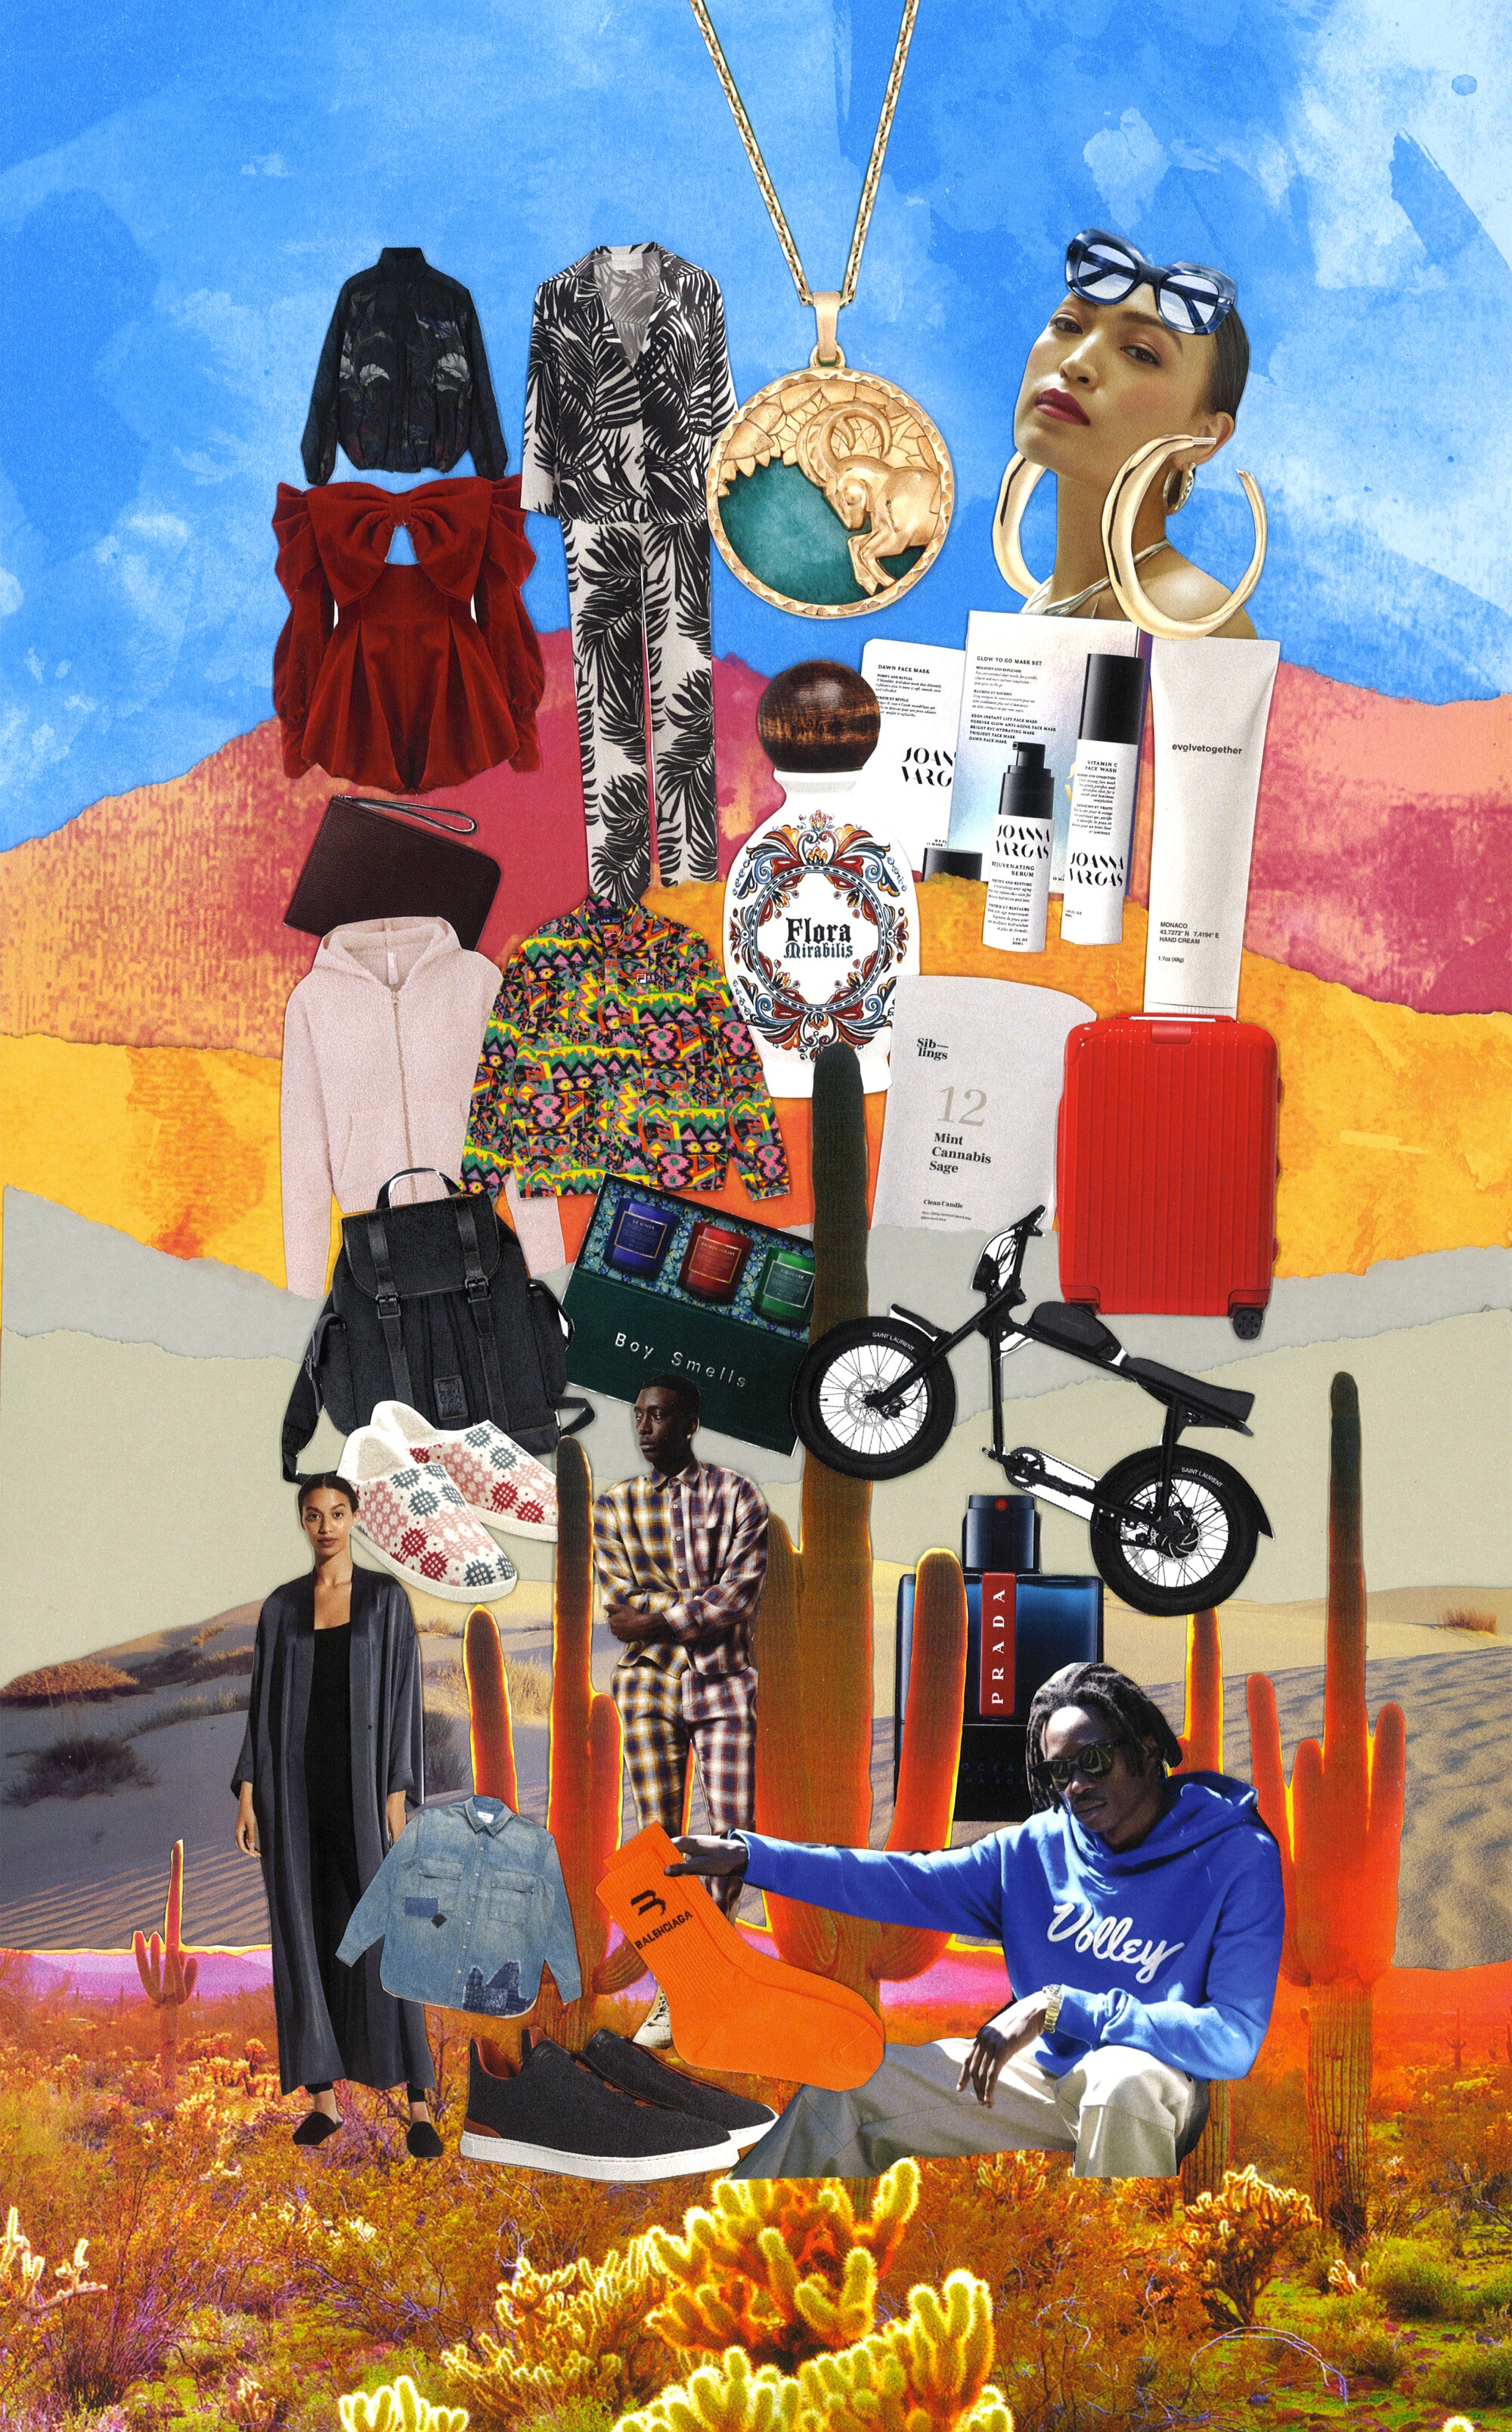 A collage of a desert landscape with a bike, shoes, clothing and people.